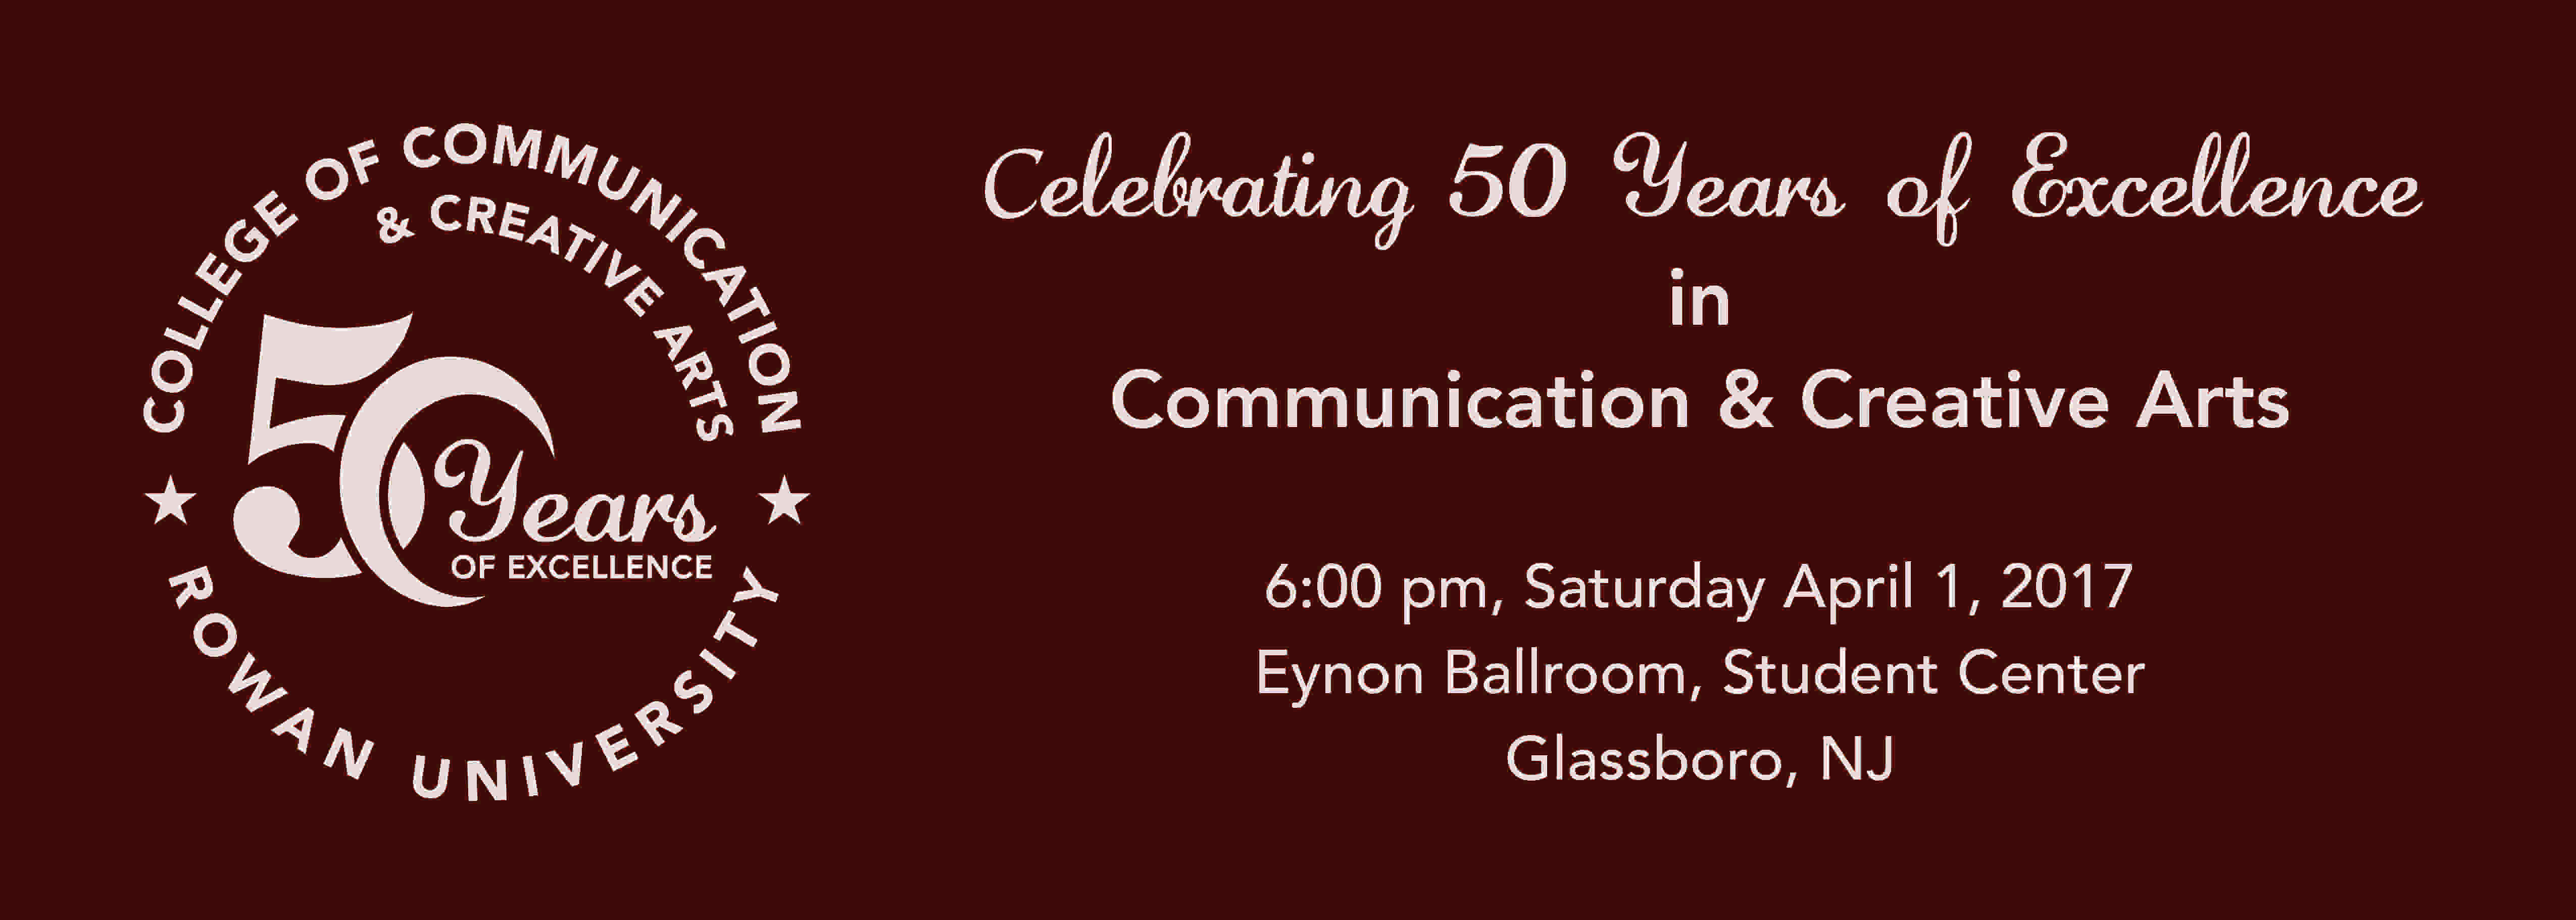 CCCA Celebrating 50 Years of Excellence | College of Communication and